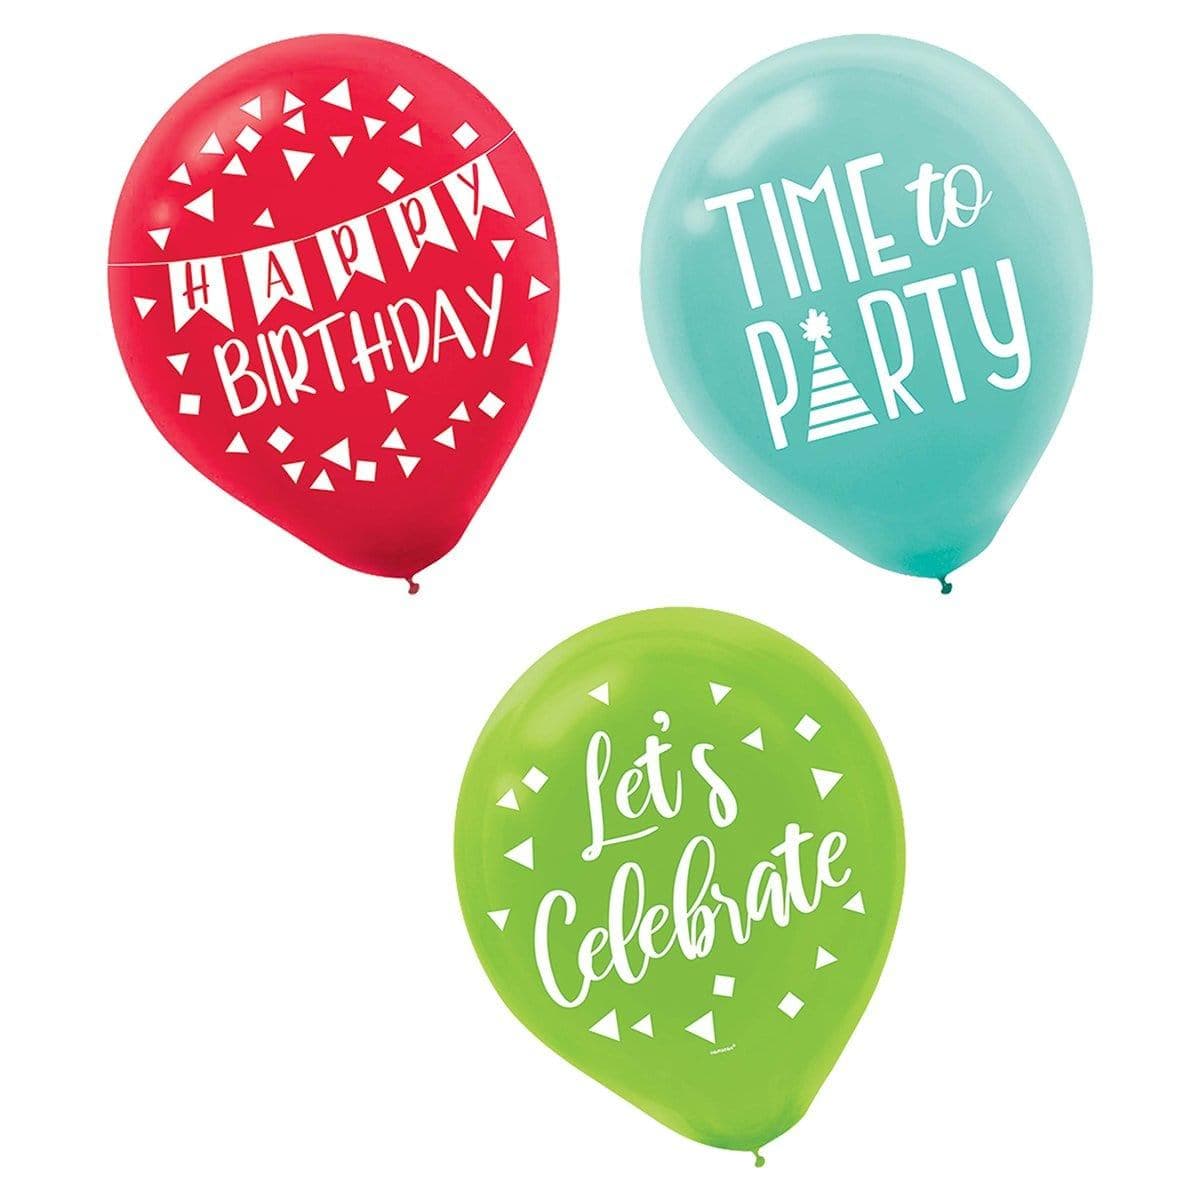 Buy General Birthday A Reason To Celebrate - Latex Balloon 15 Per Package sold at Party Expert